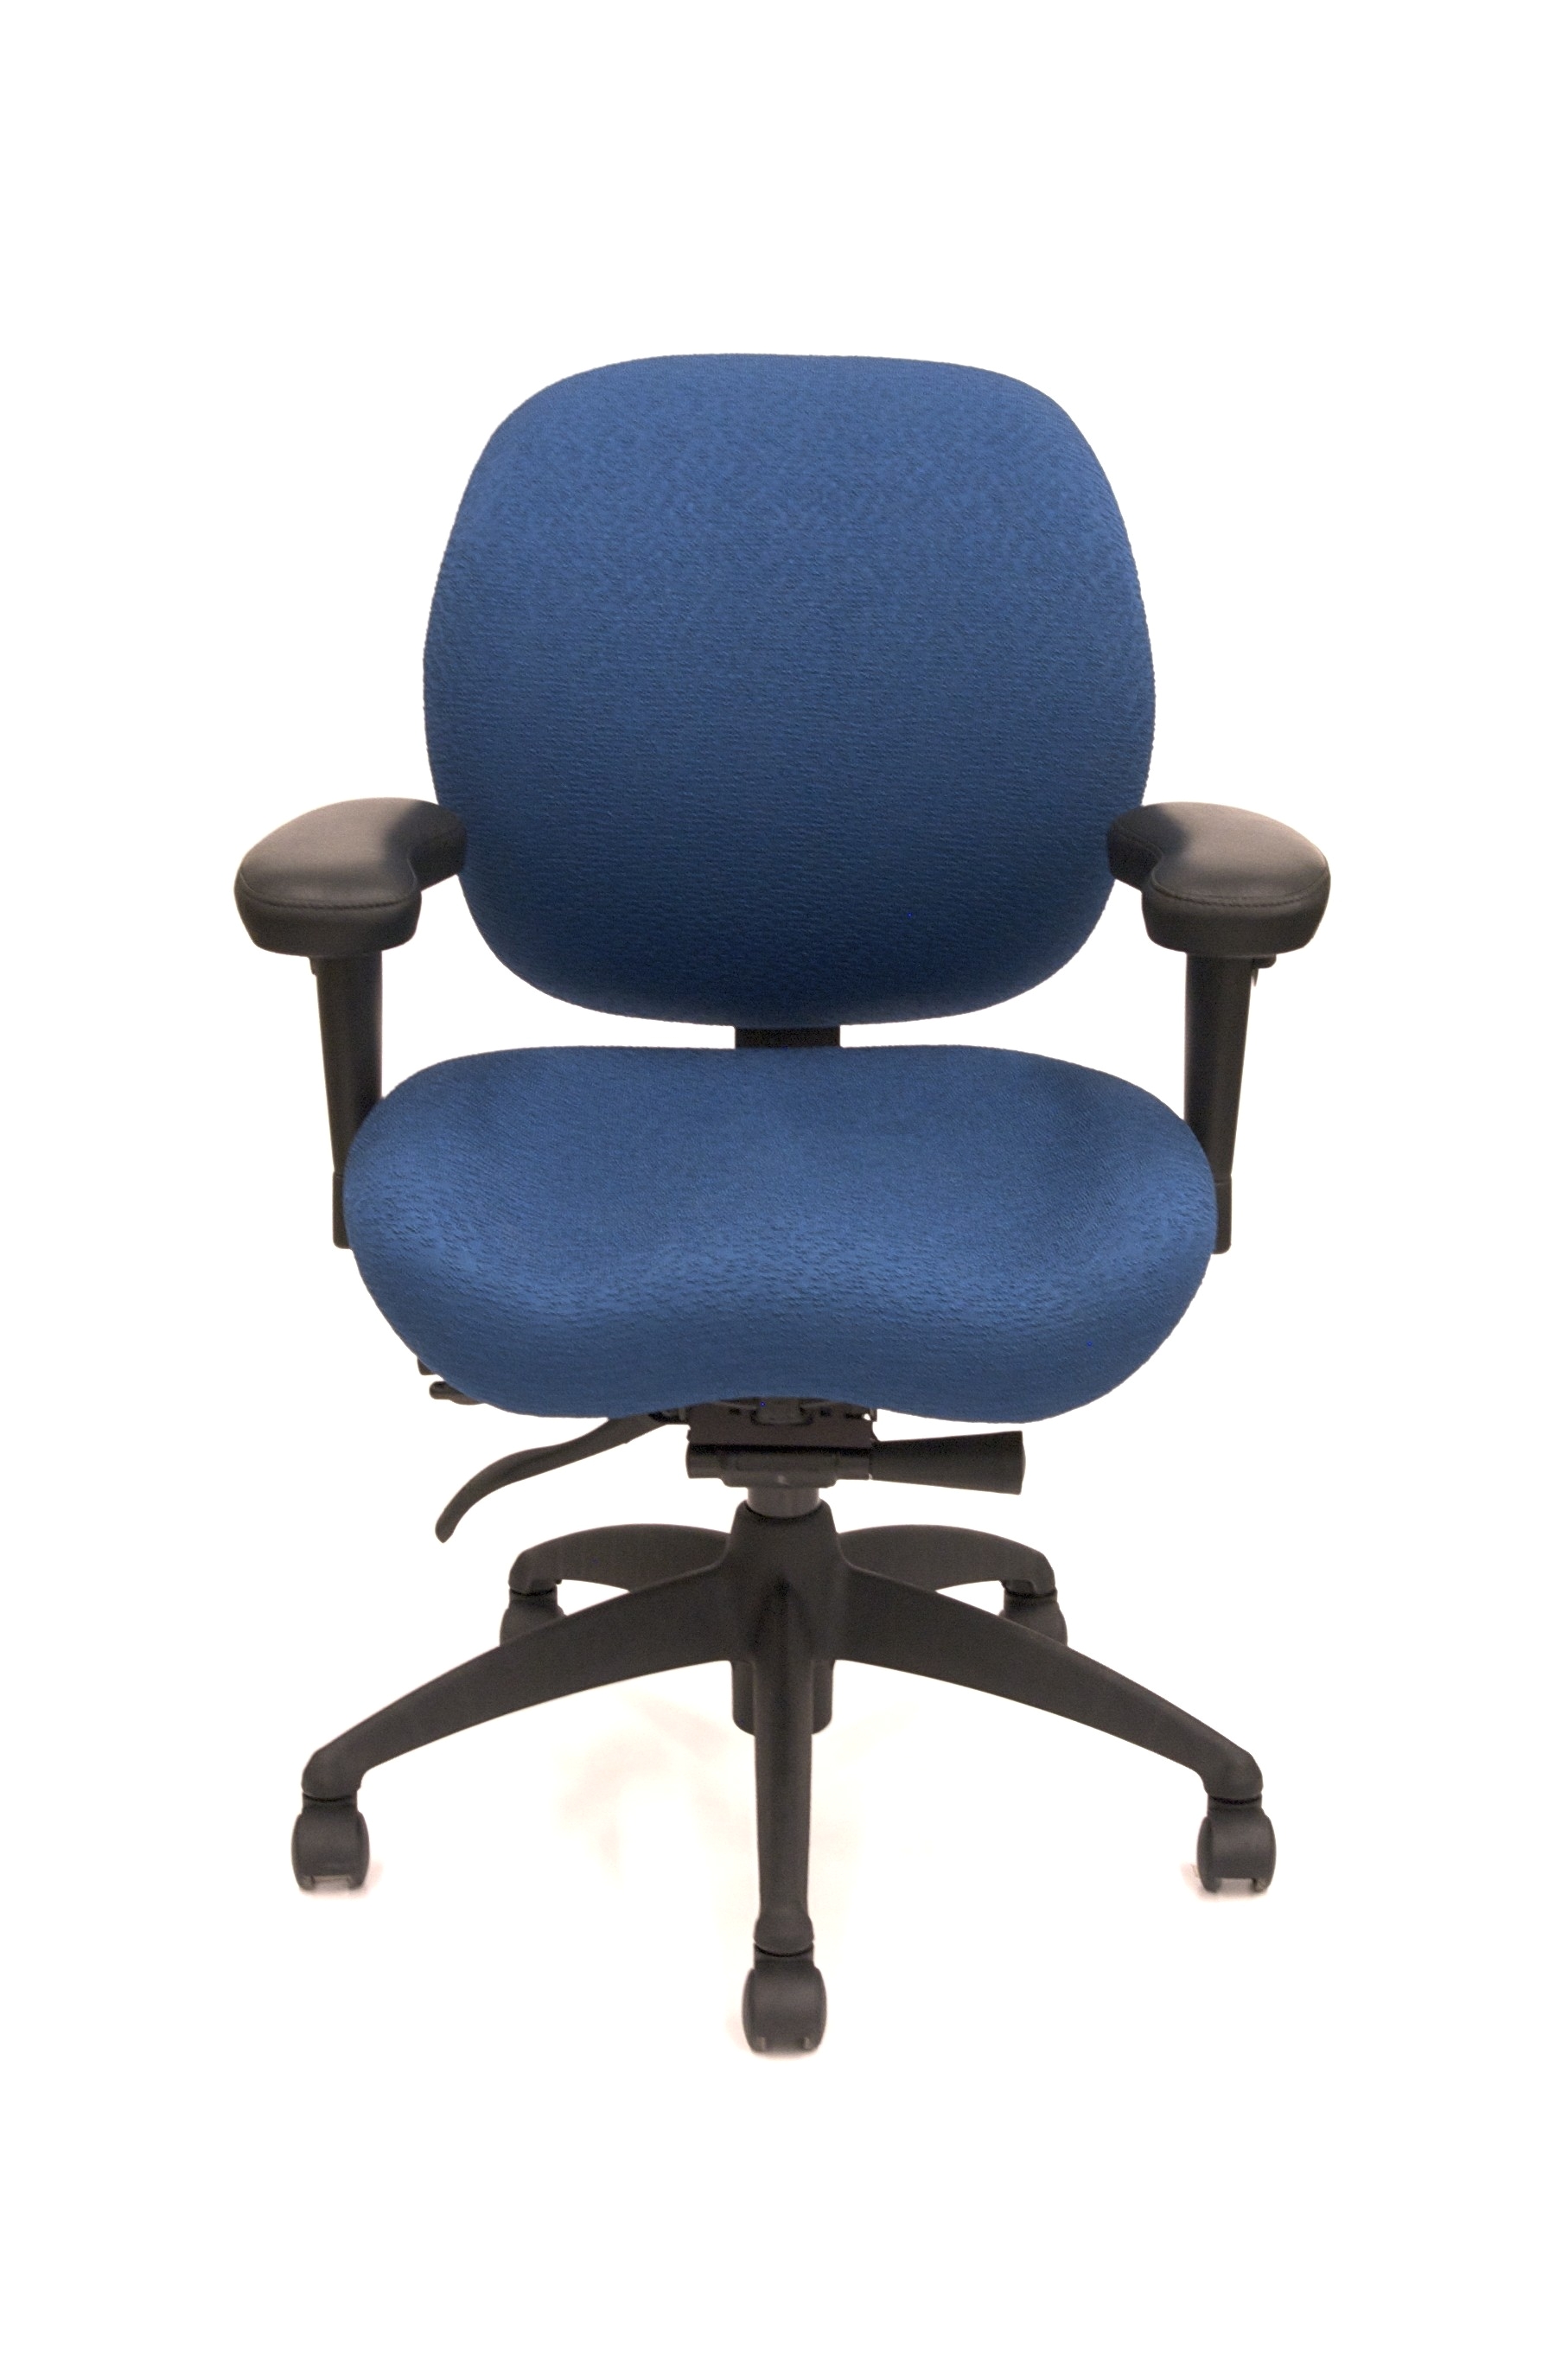 lifeform memory foam office chair relax the back dash biscay front chiropractic chairs for mesh swivel